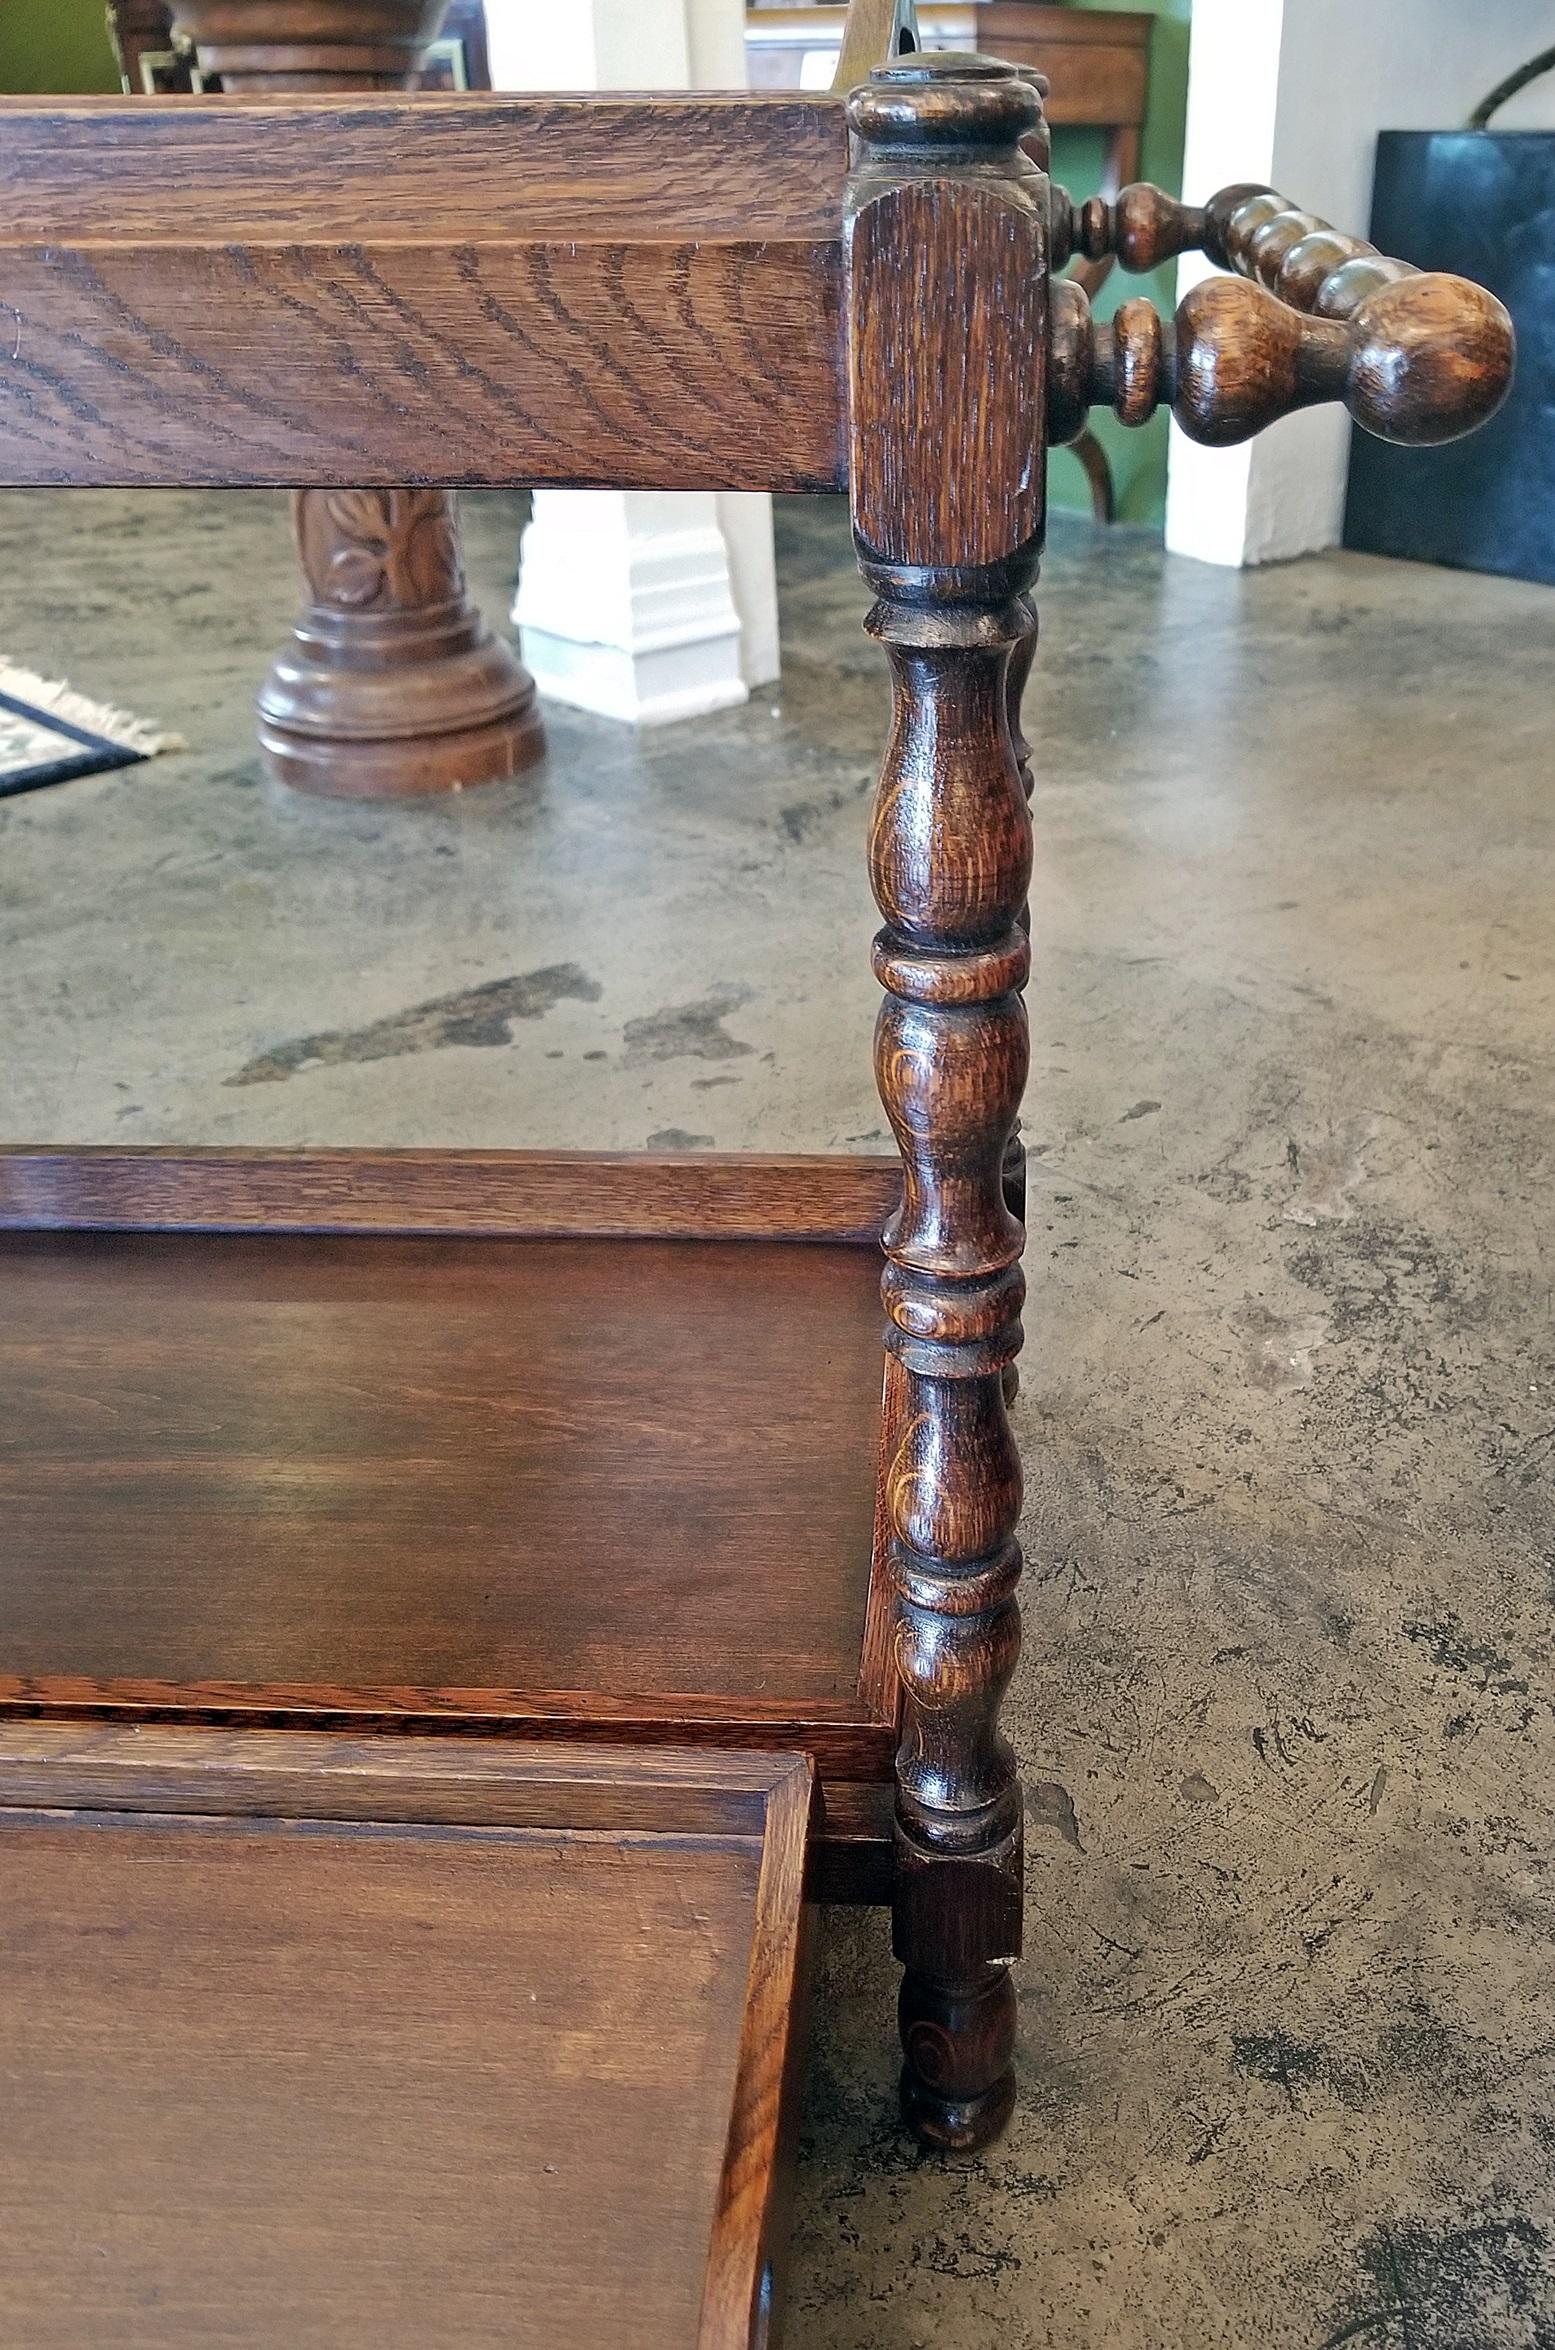 Really cute 19th century, oak, provincial butler’s tray stand with 3 butler’s trays.

2 on top and 1 on bottom and all different sizes.

Stand has hand-turned support columns and handles.

The trays simply sit on the stand with the 2 larger